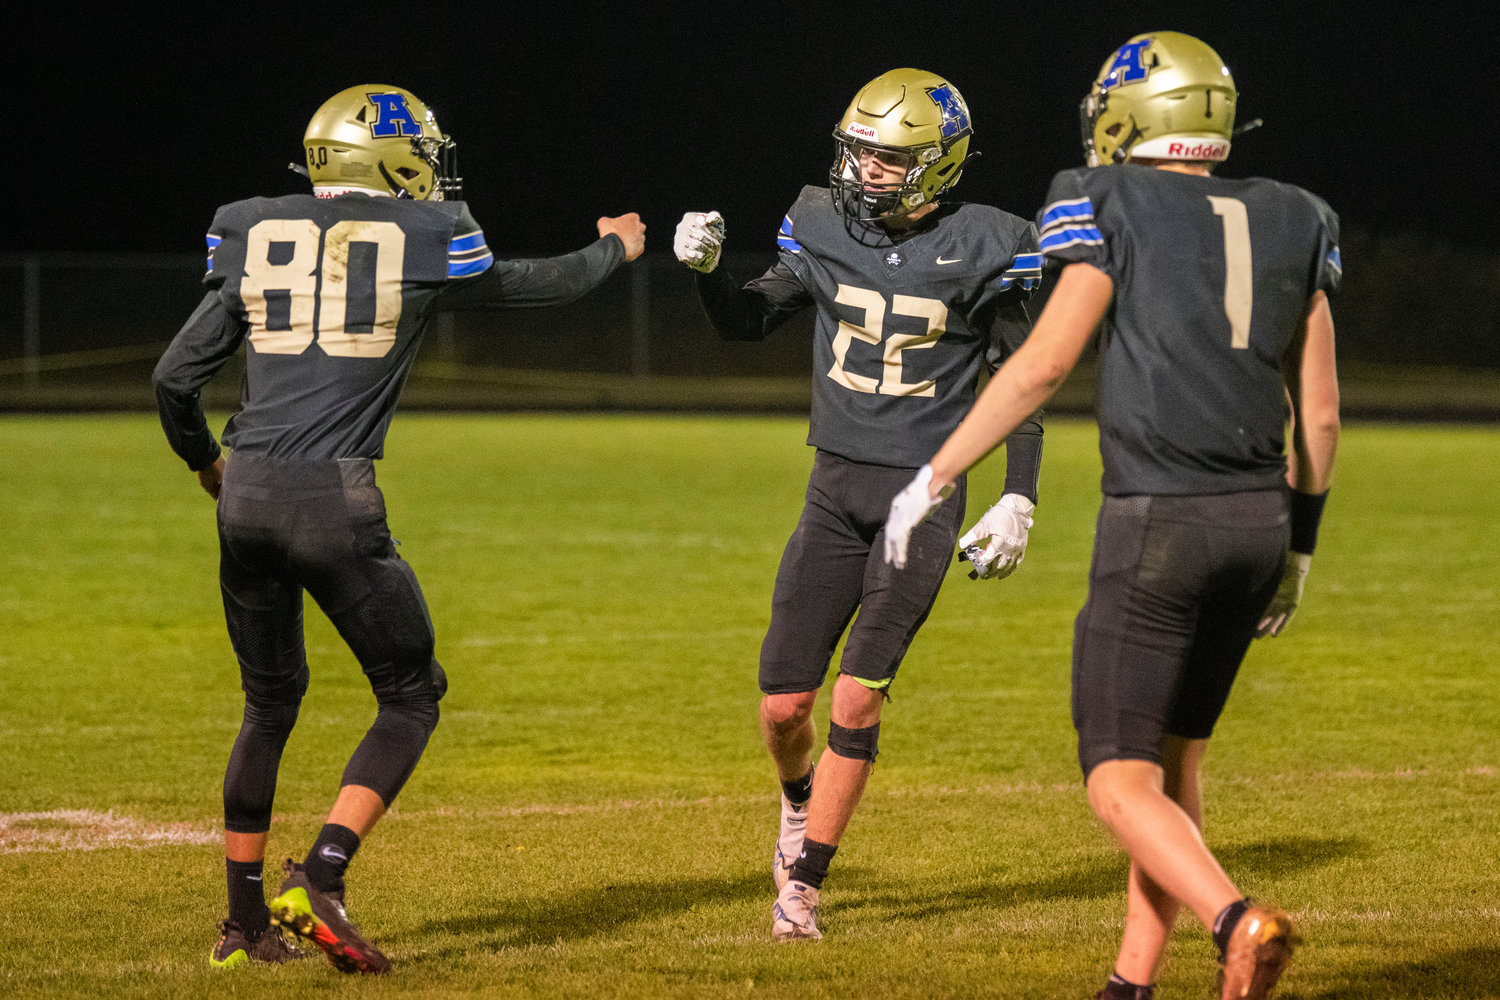 Adna players fist-bump during a game Thursday night at Pirate Stadium.